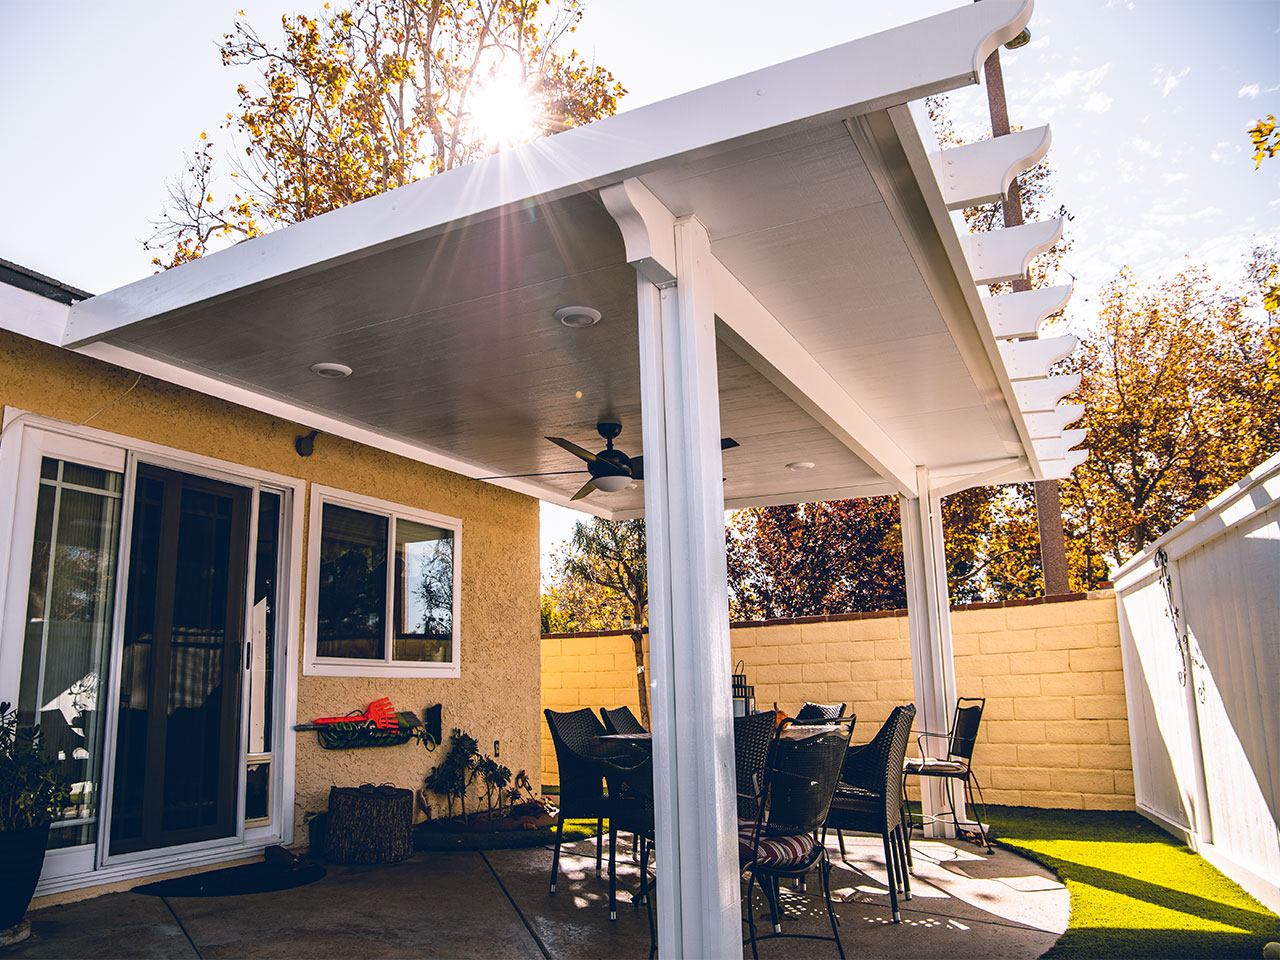 Alumawood patio covers in Simi Valley - Patio Covers Simi ...